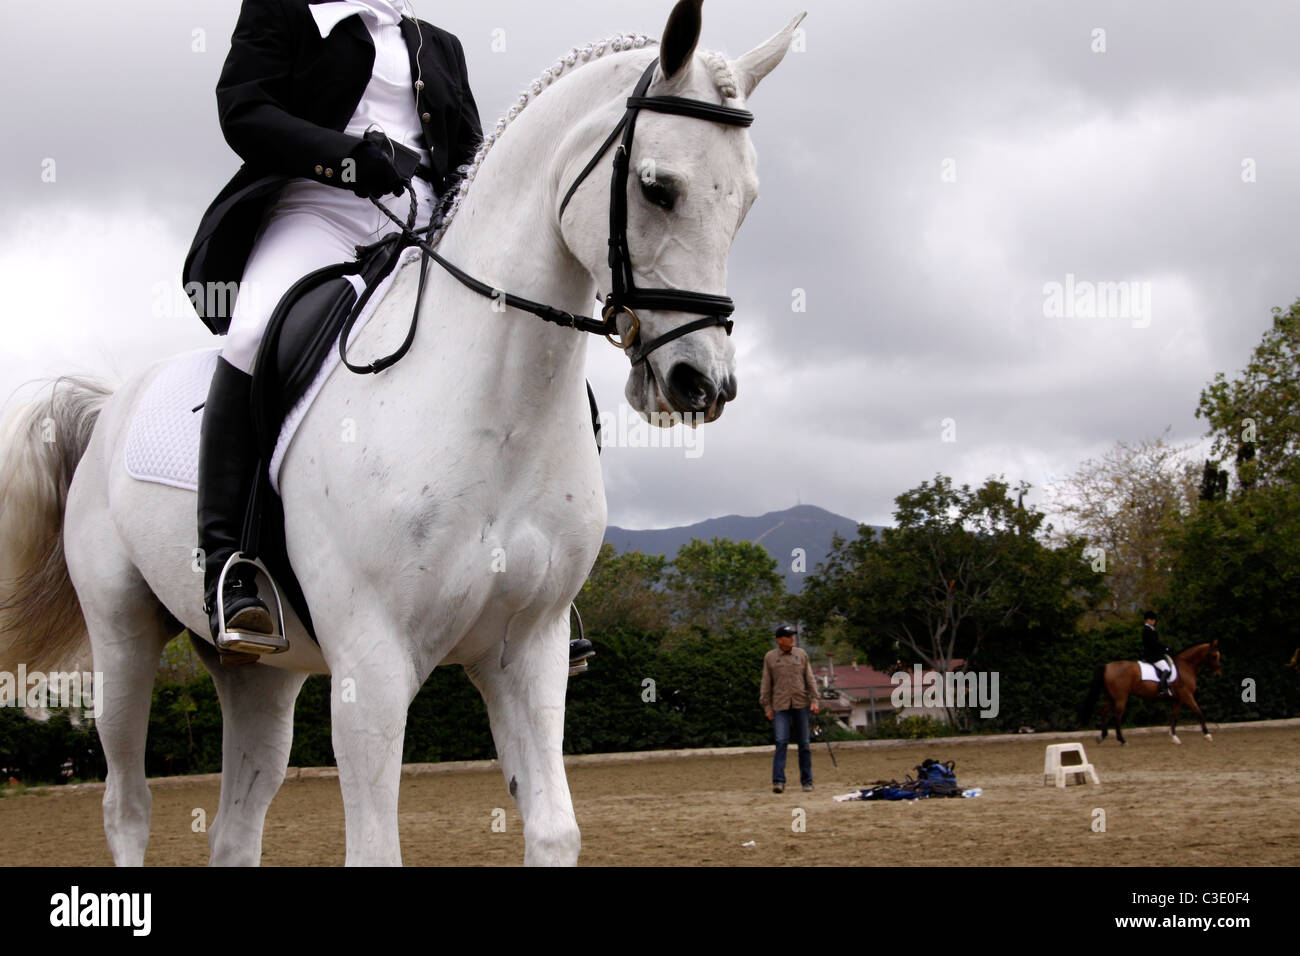 Arabian horse warming up before a dressage event Stock Photo